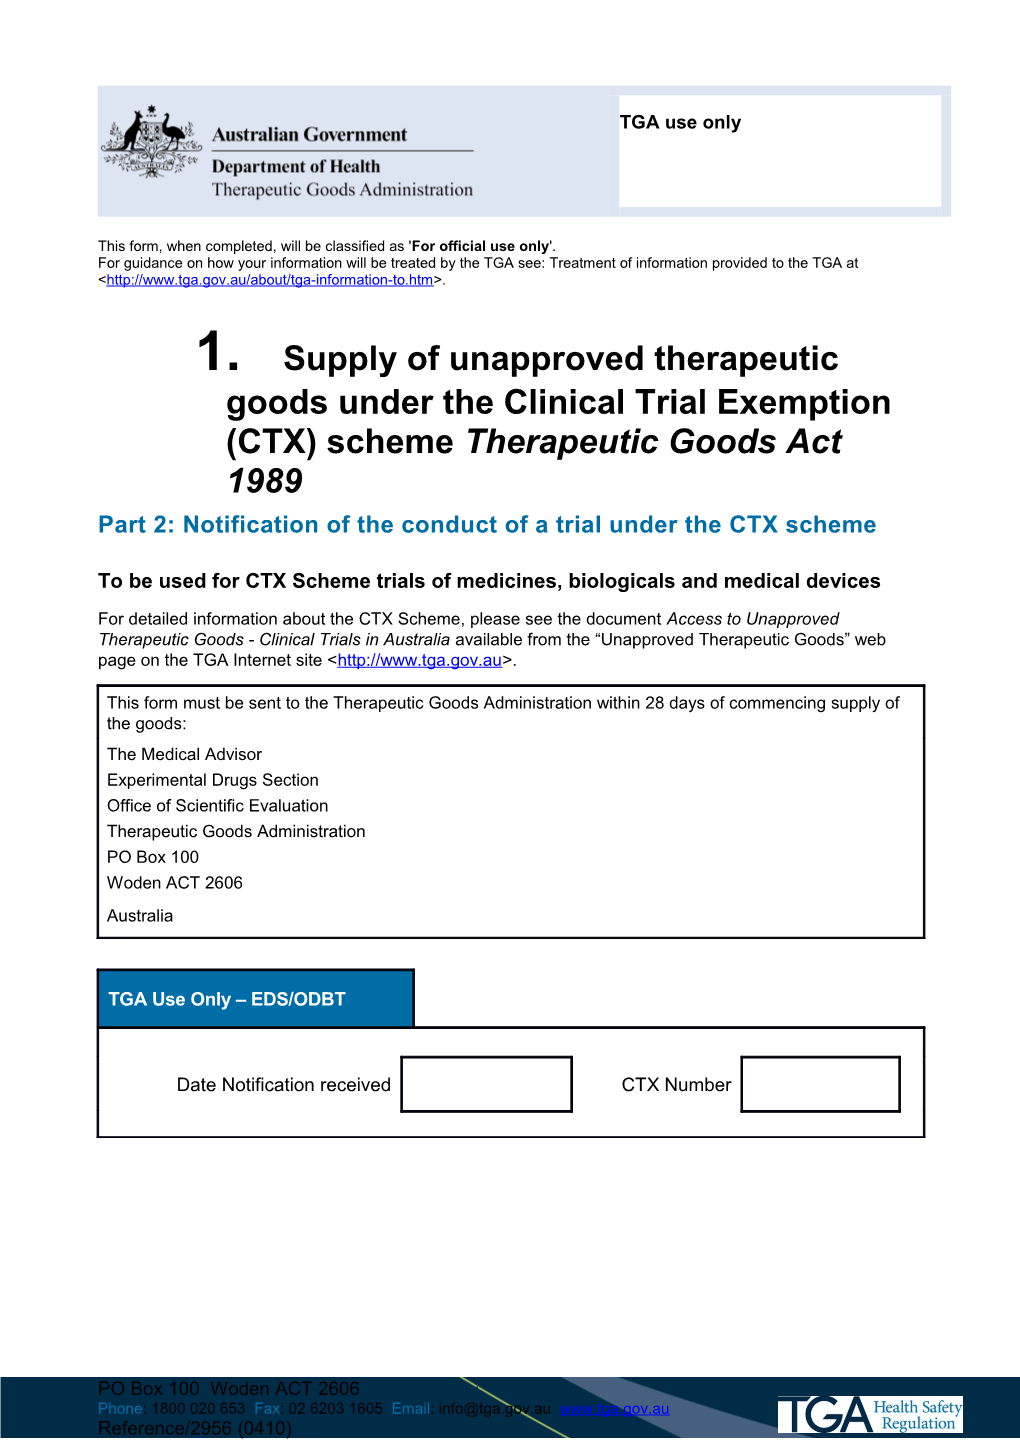 Supply of Unapproved Therapeutic Goods Under the Clinical Trial Exemption (CTX) Scheme